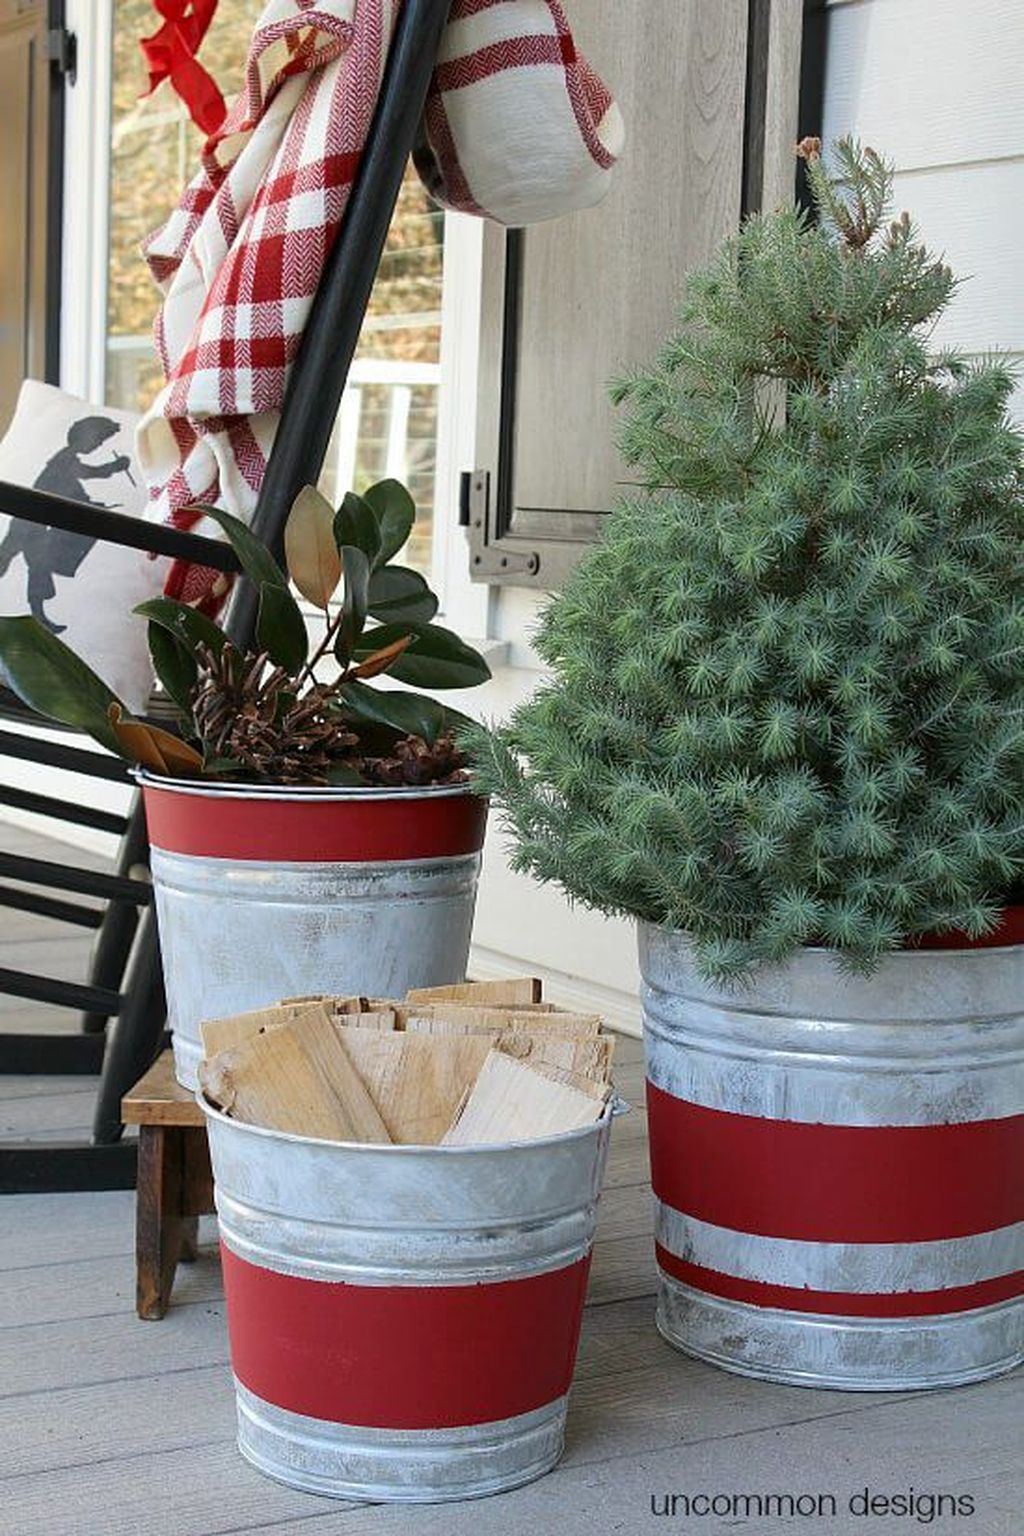 Marvelous Outdoor Holiday Planter Ideas To Beauty Porch Décor 08